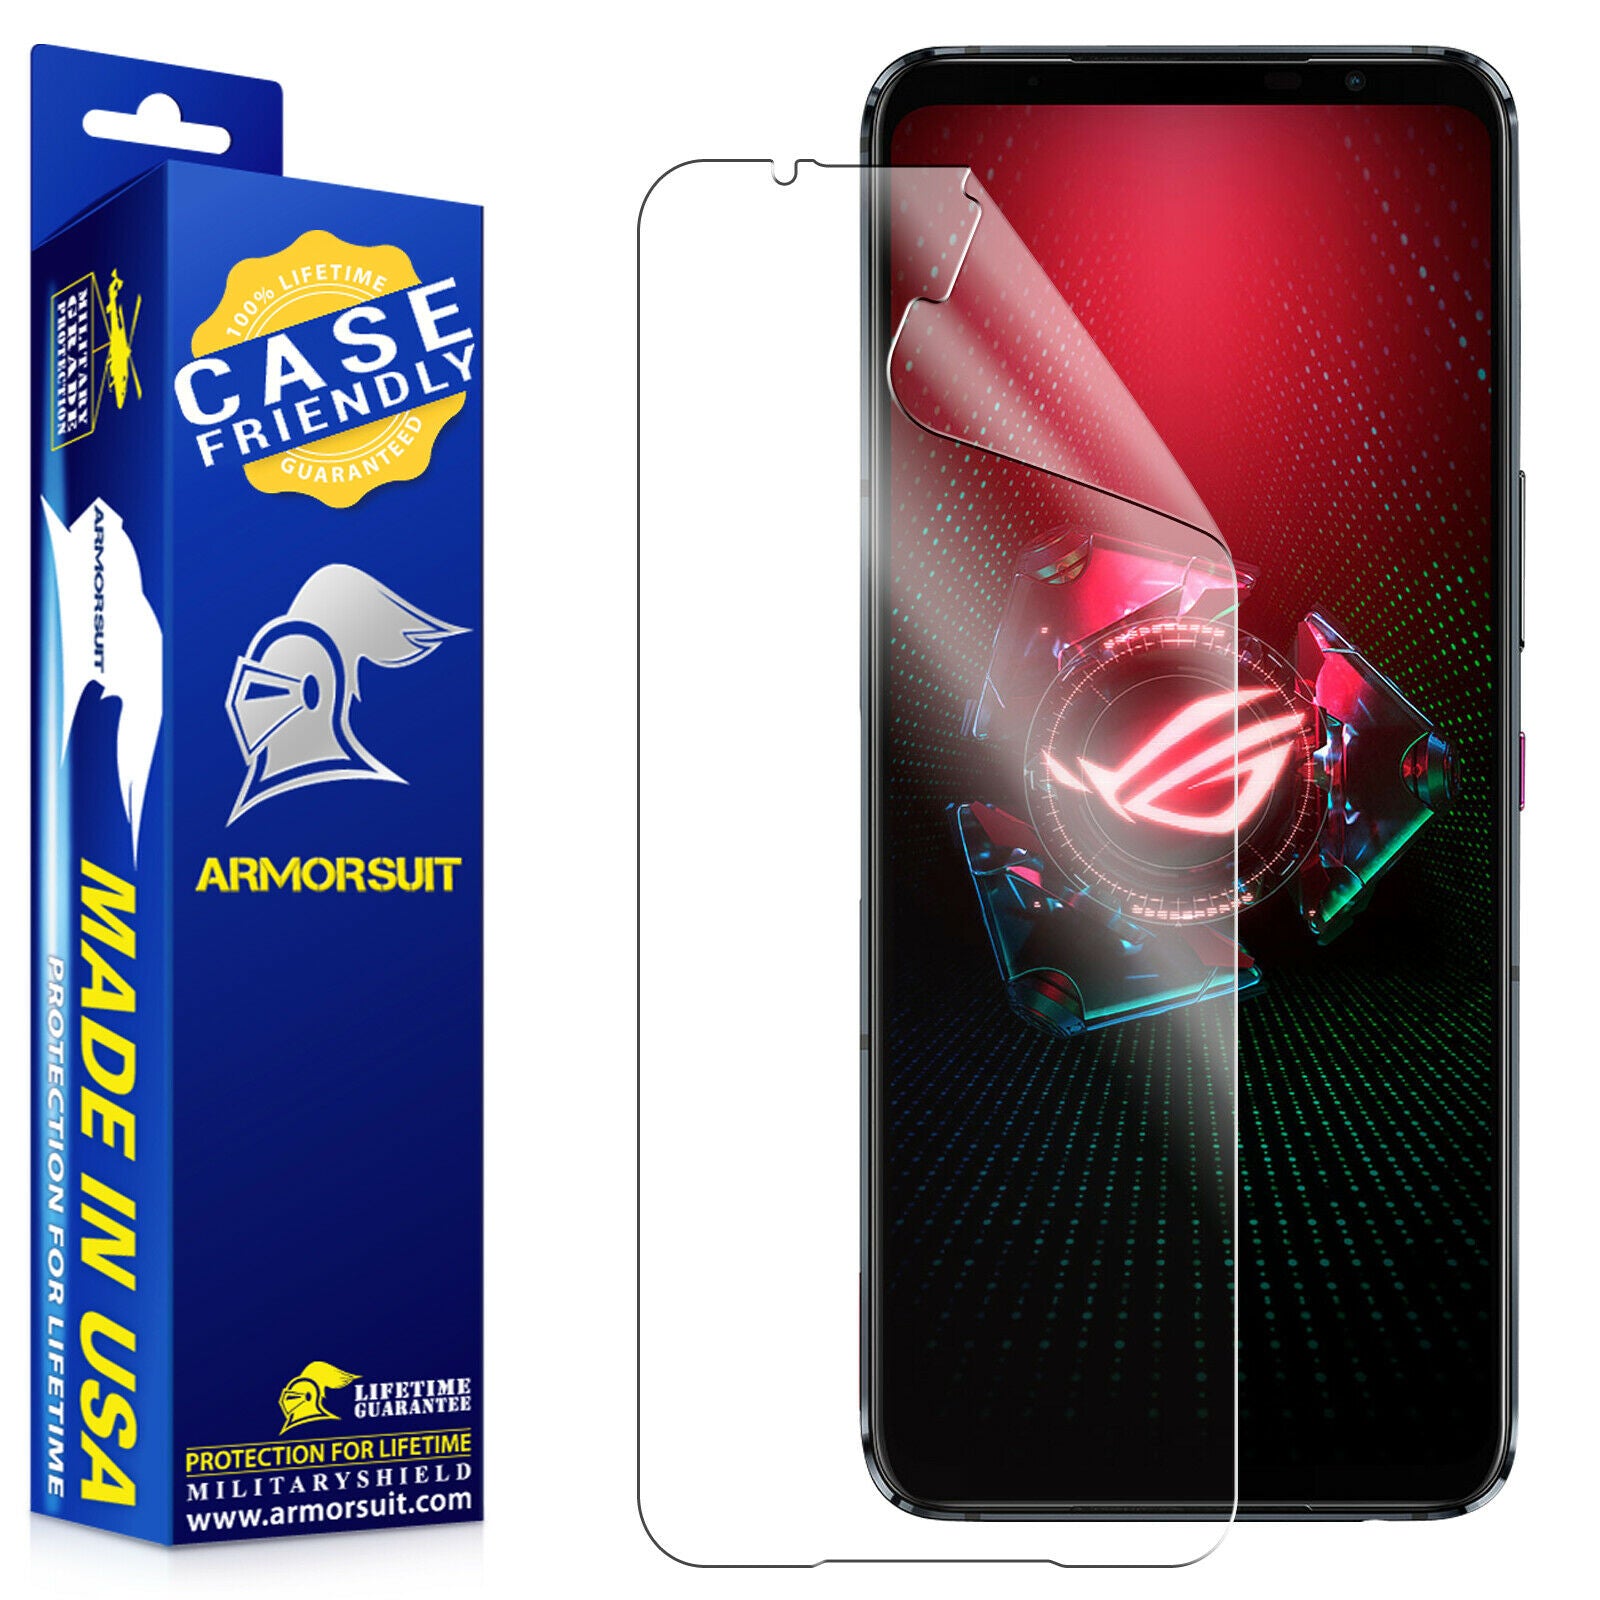 [2 Pack] Asus ROG-5 Phone Screen Protector - Case-Friendly Matte